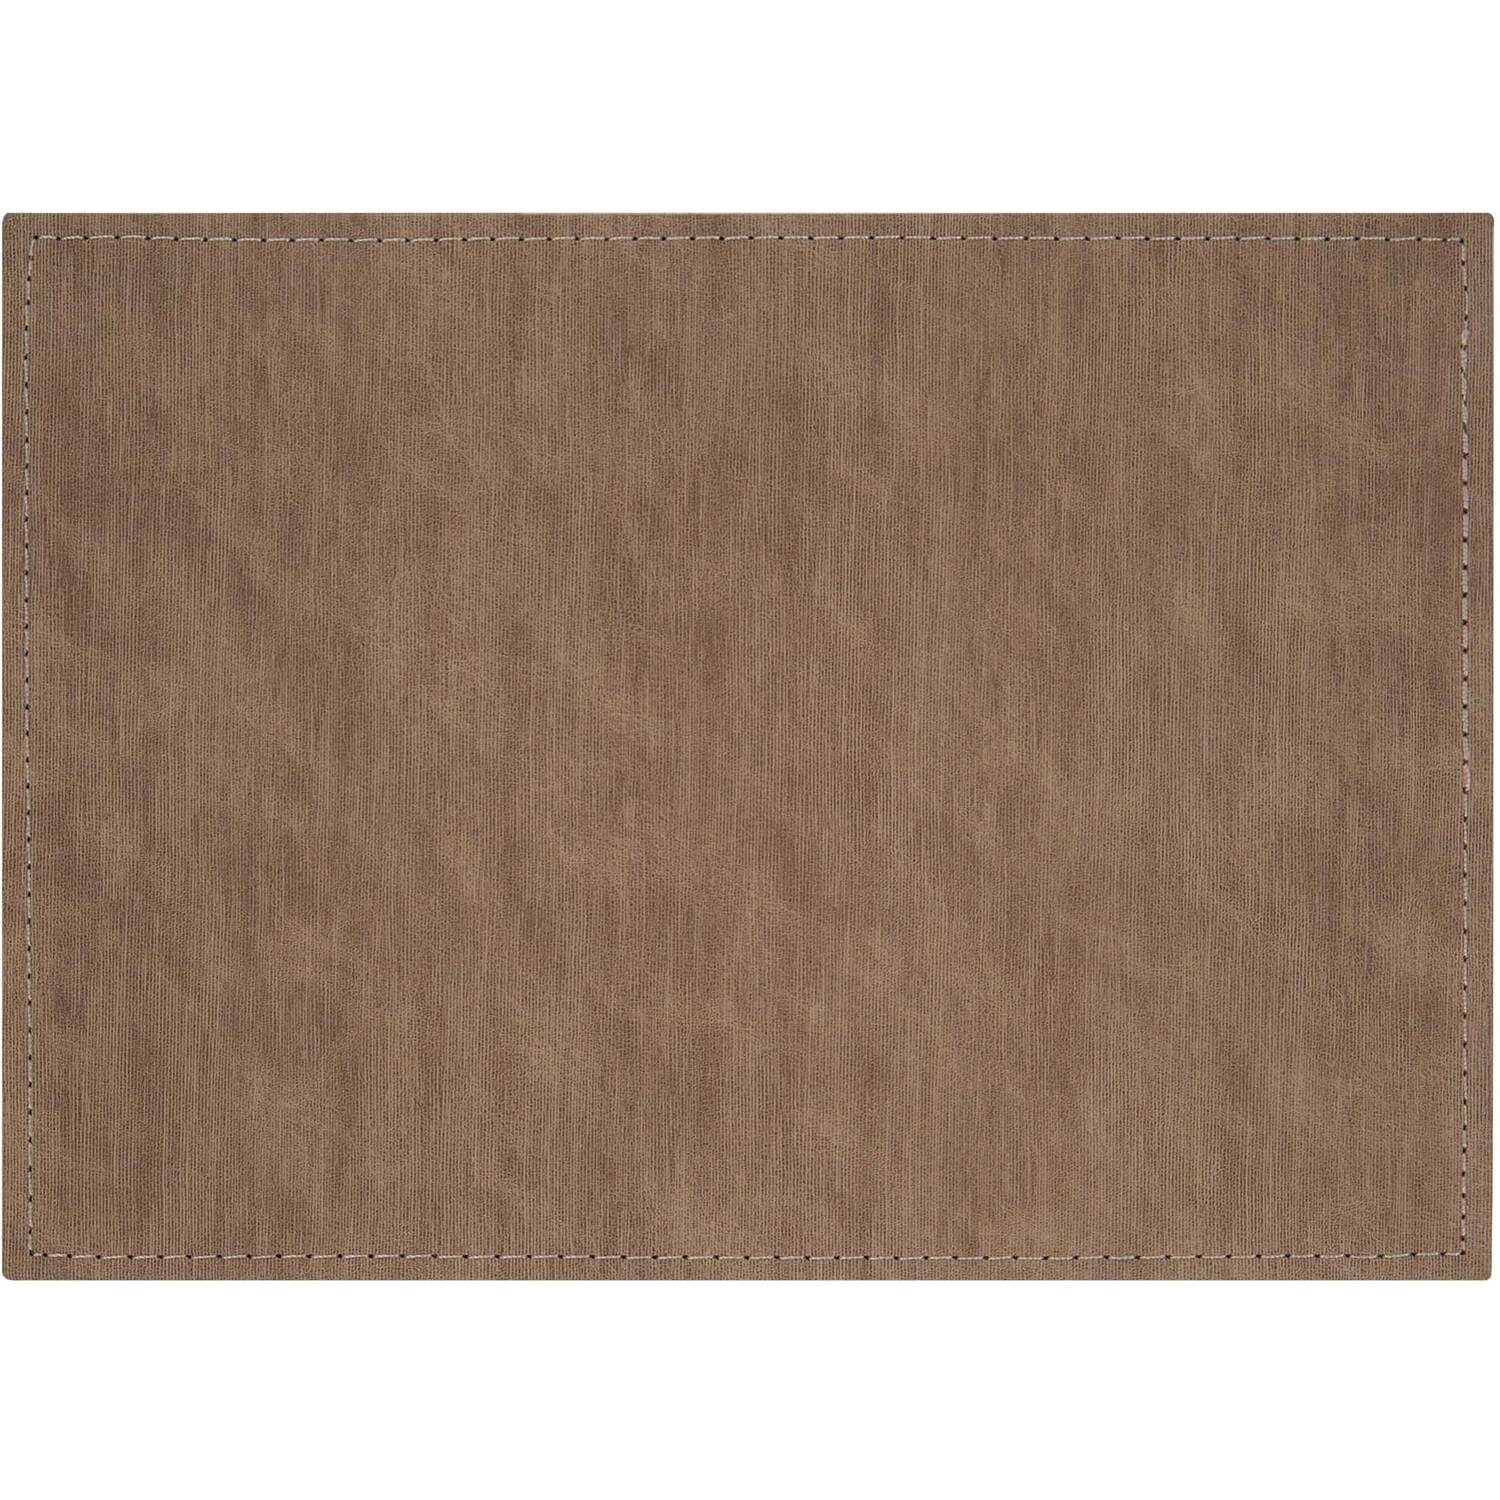 Pack of 4 Soft Touch Linen Effect Placemats - Brown Image 3